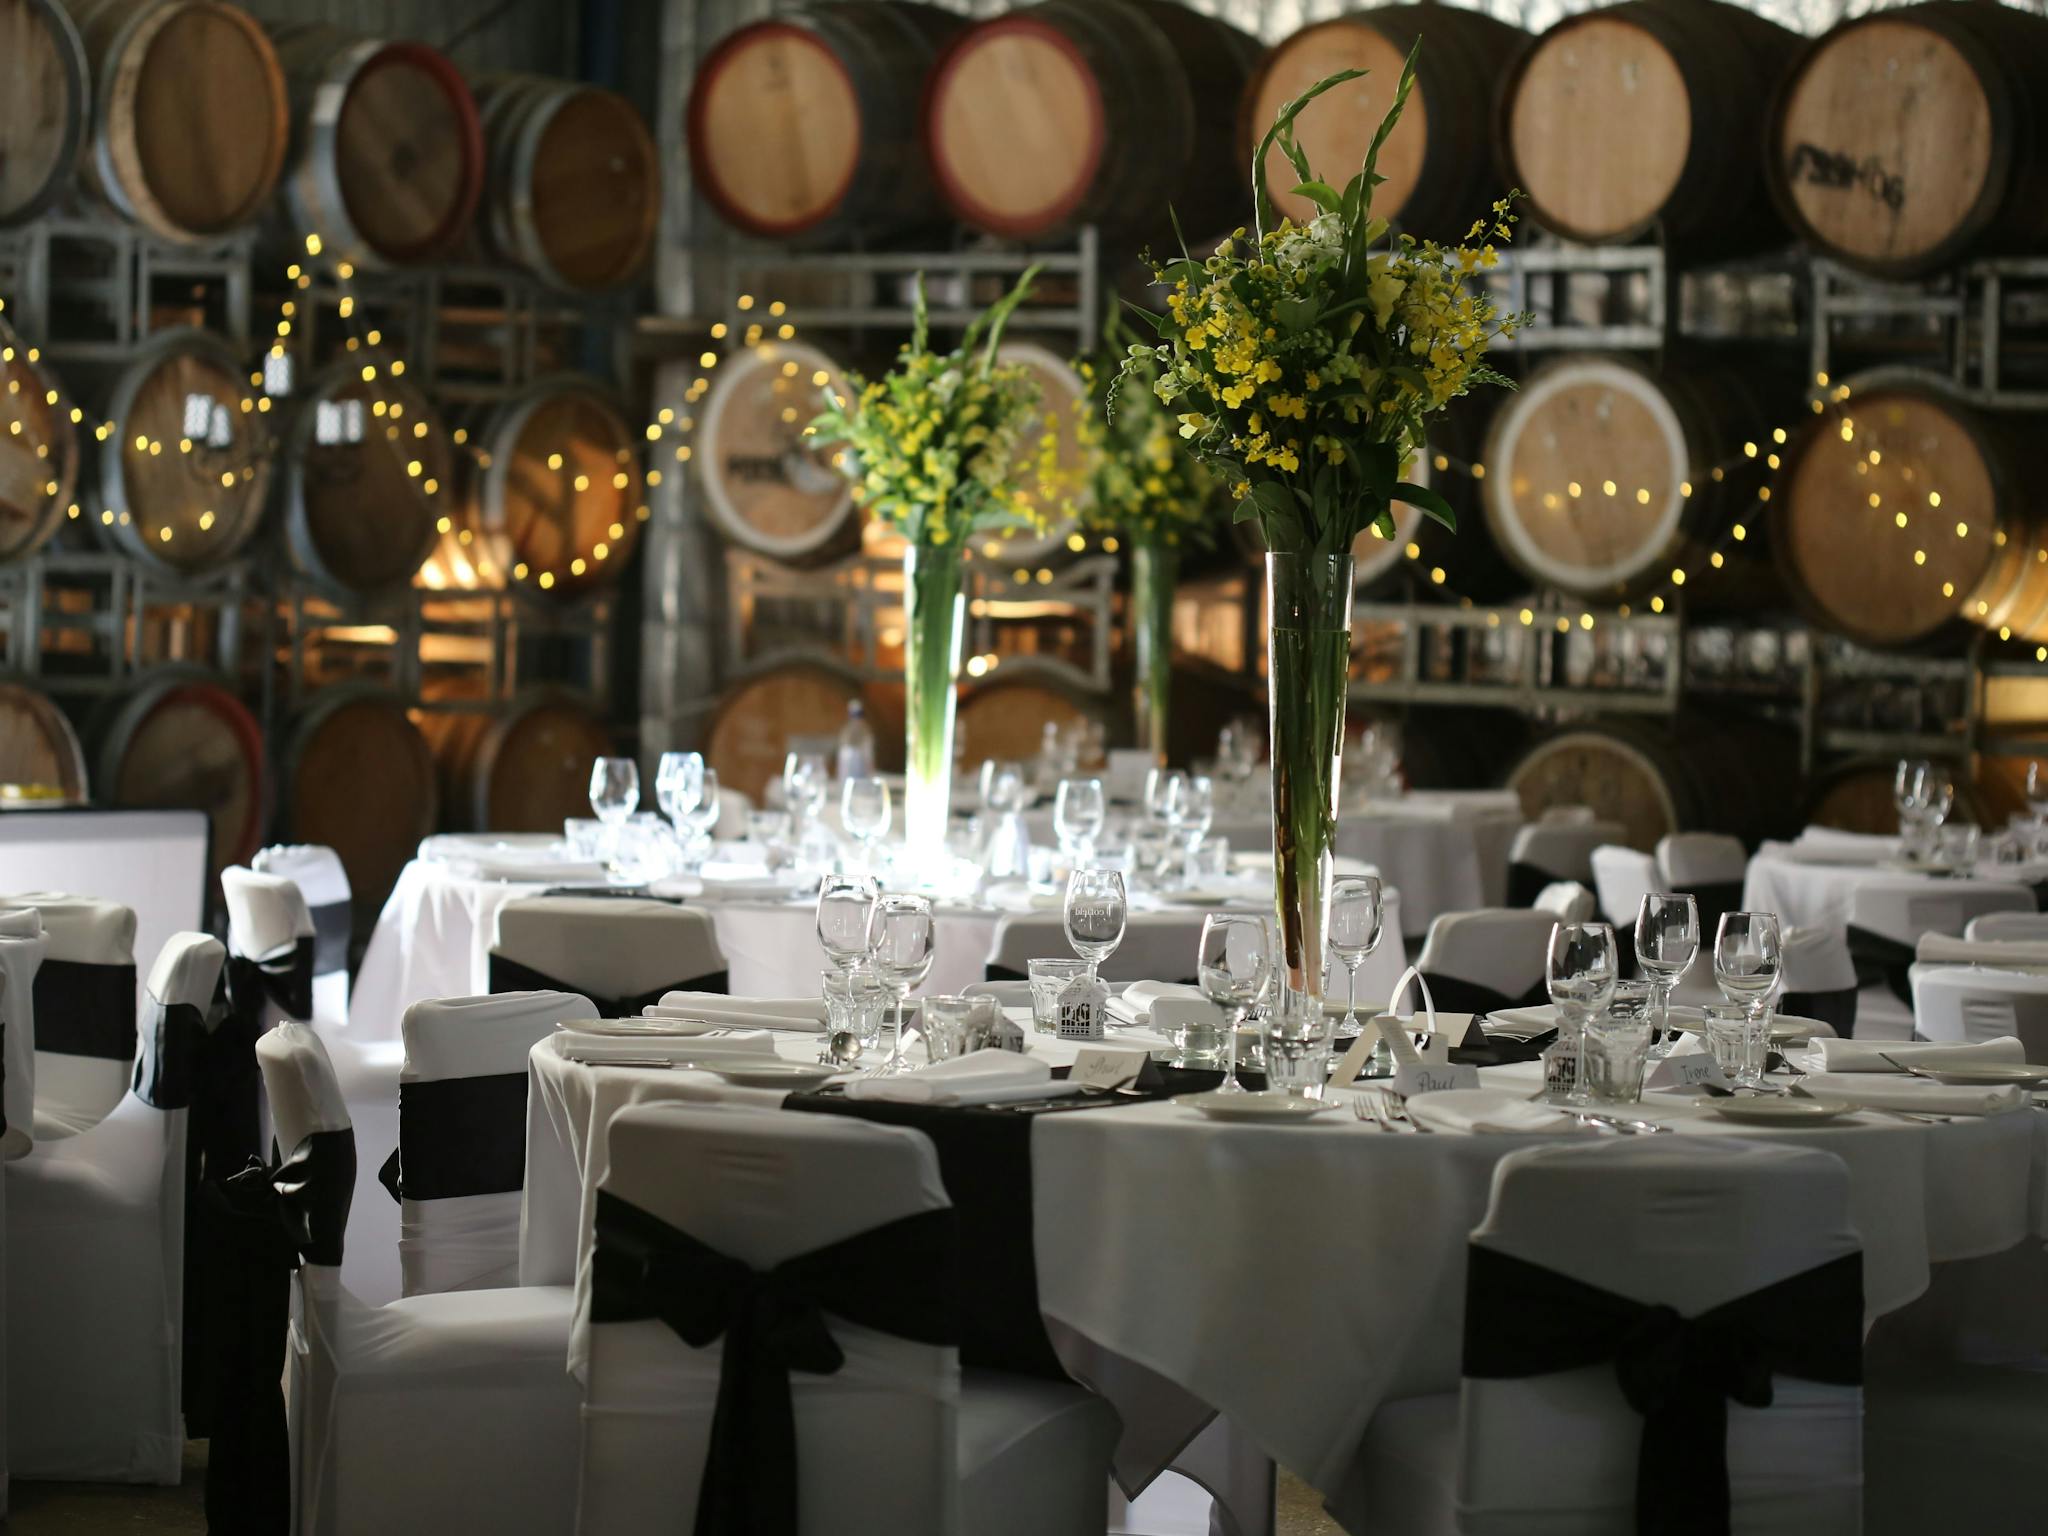 Cofield Wines and The Pickled Sisters Cafe are a popular wedding venue